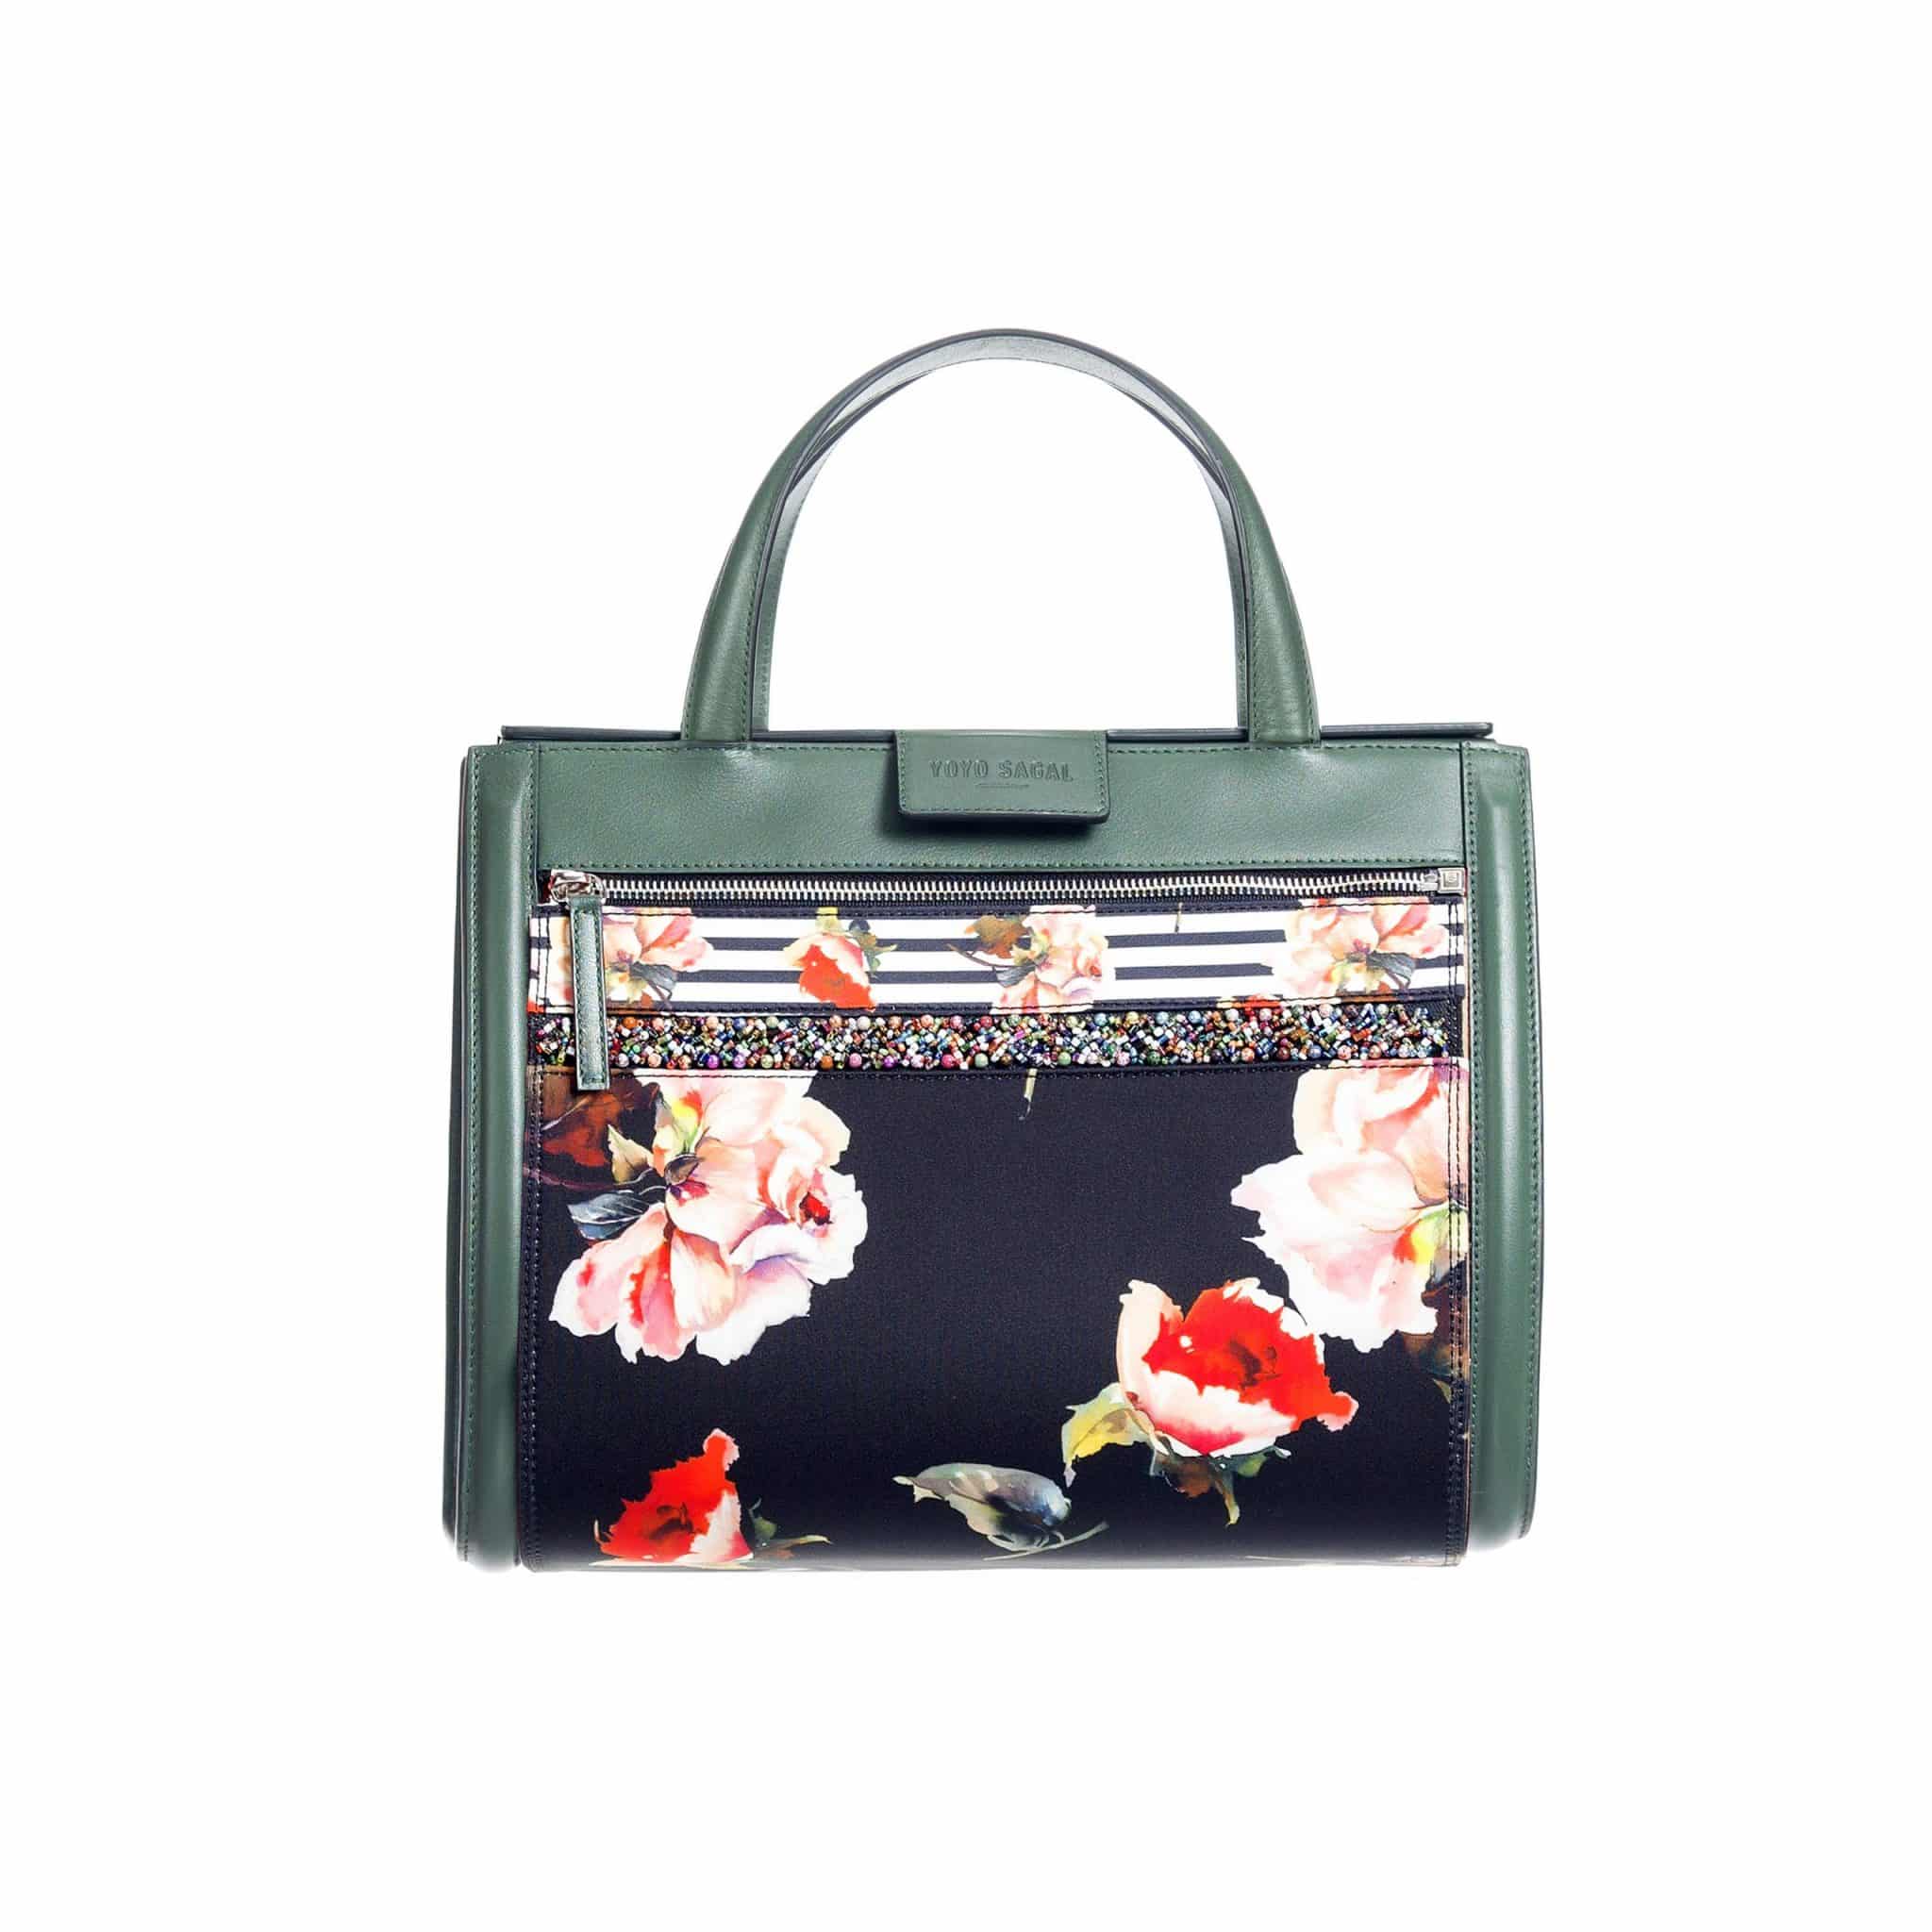 Bolso verde mujer - Green bag with red rose black front- Yoyo Sagal